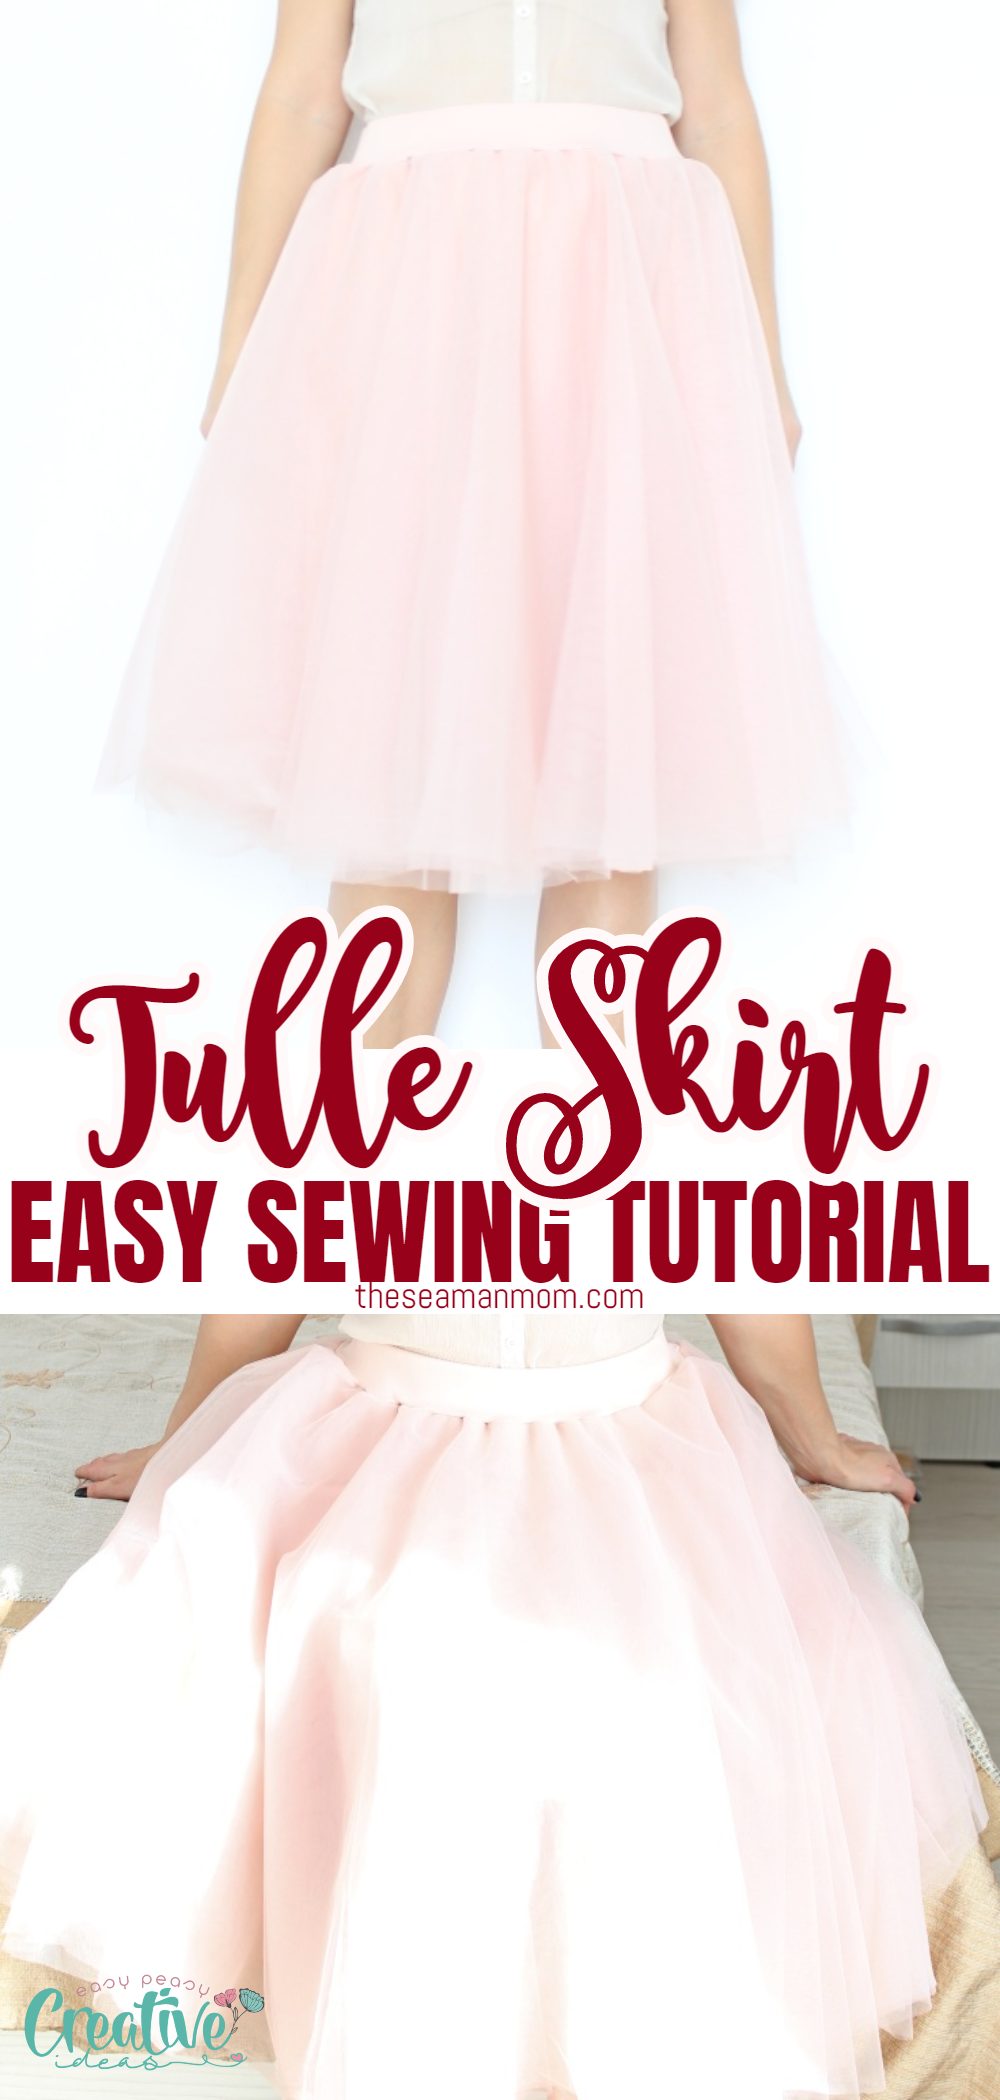 Everyone loves a good tulle skirt and you can make one too! This women tulle skirt looks adorable and is so fun to wear! Learn how to sew one here! The tutorial for this beautiful layered tulle skirt makes the whole process so simple and easy peasy! via @petroneagu